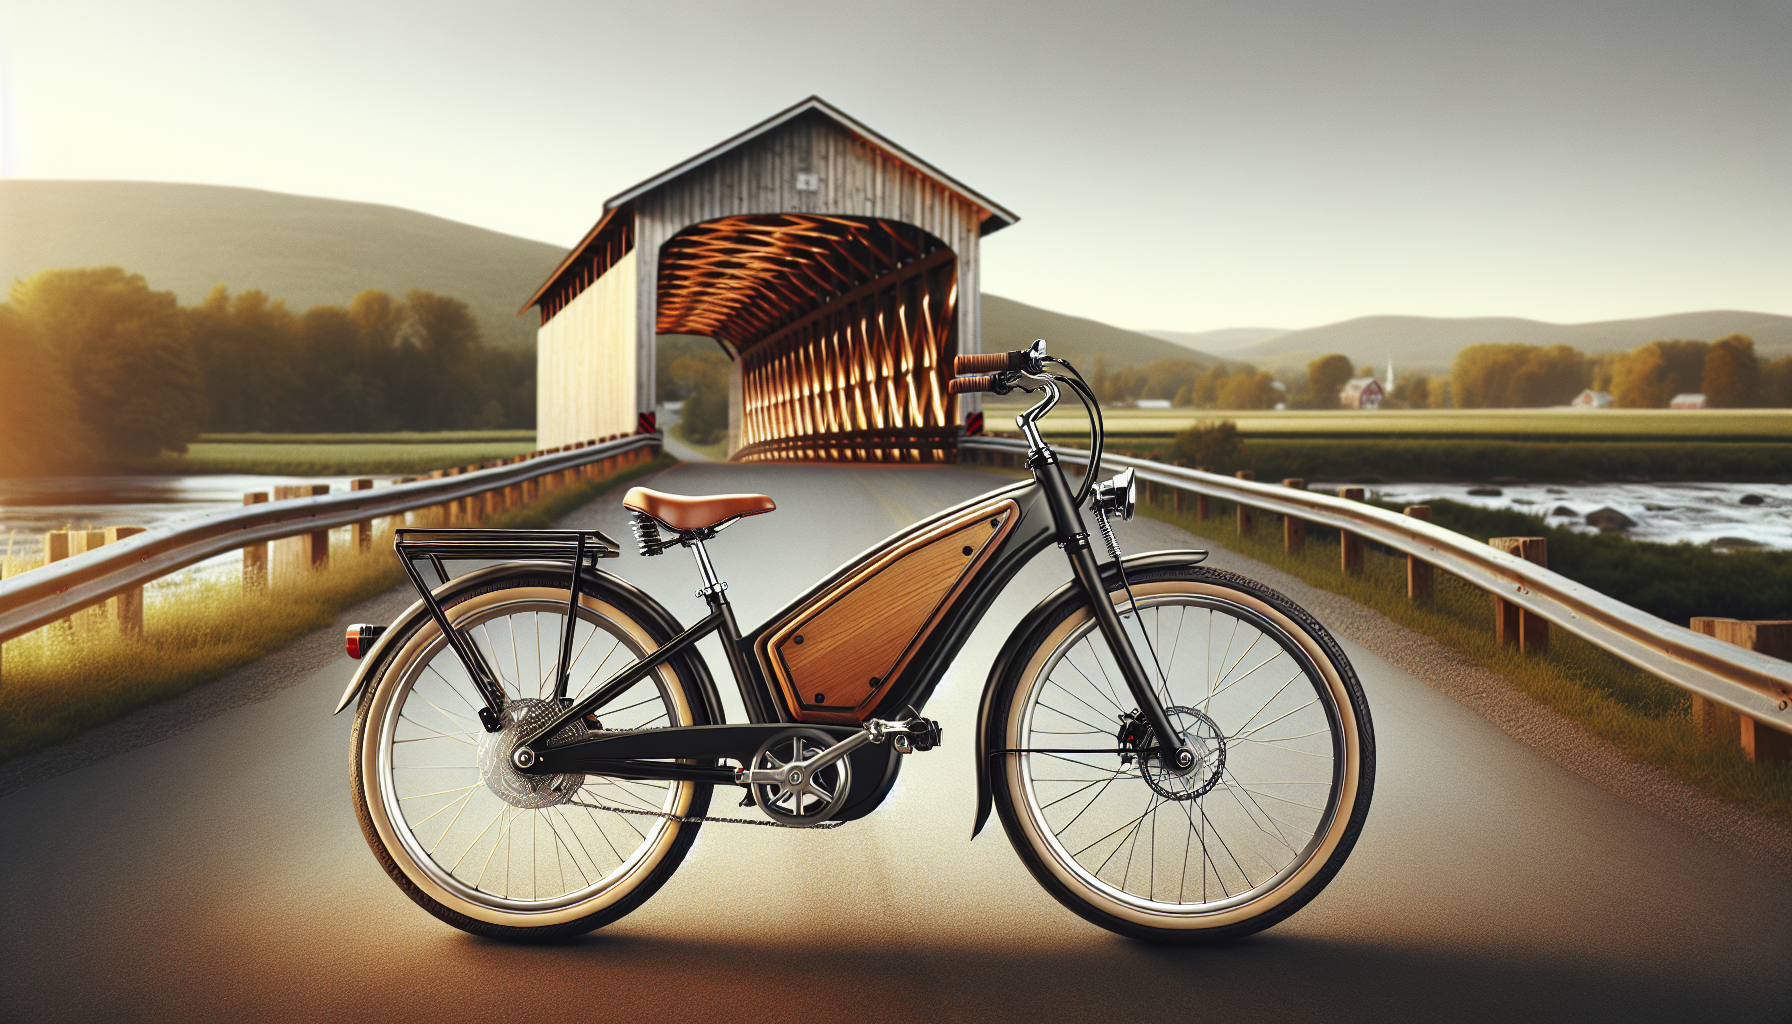 What Are The Key Features Of The Covered Bridge Electric Bike?